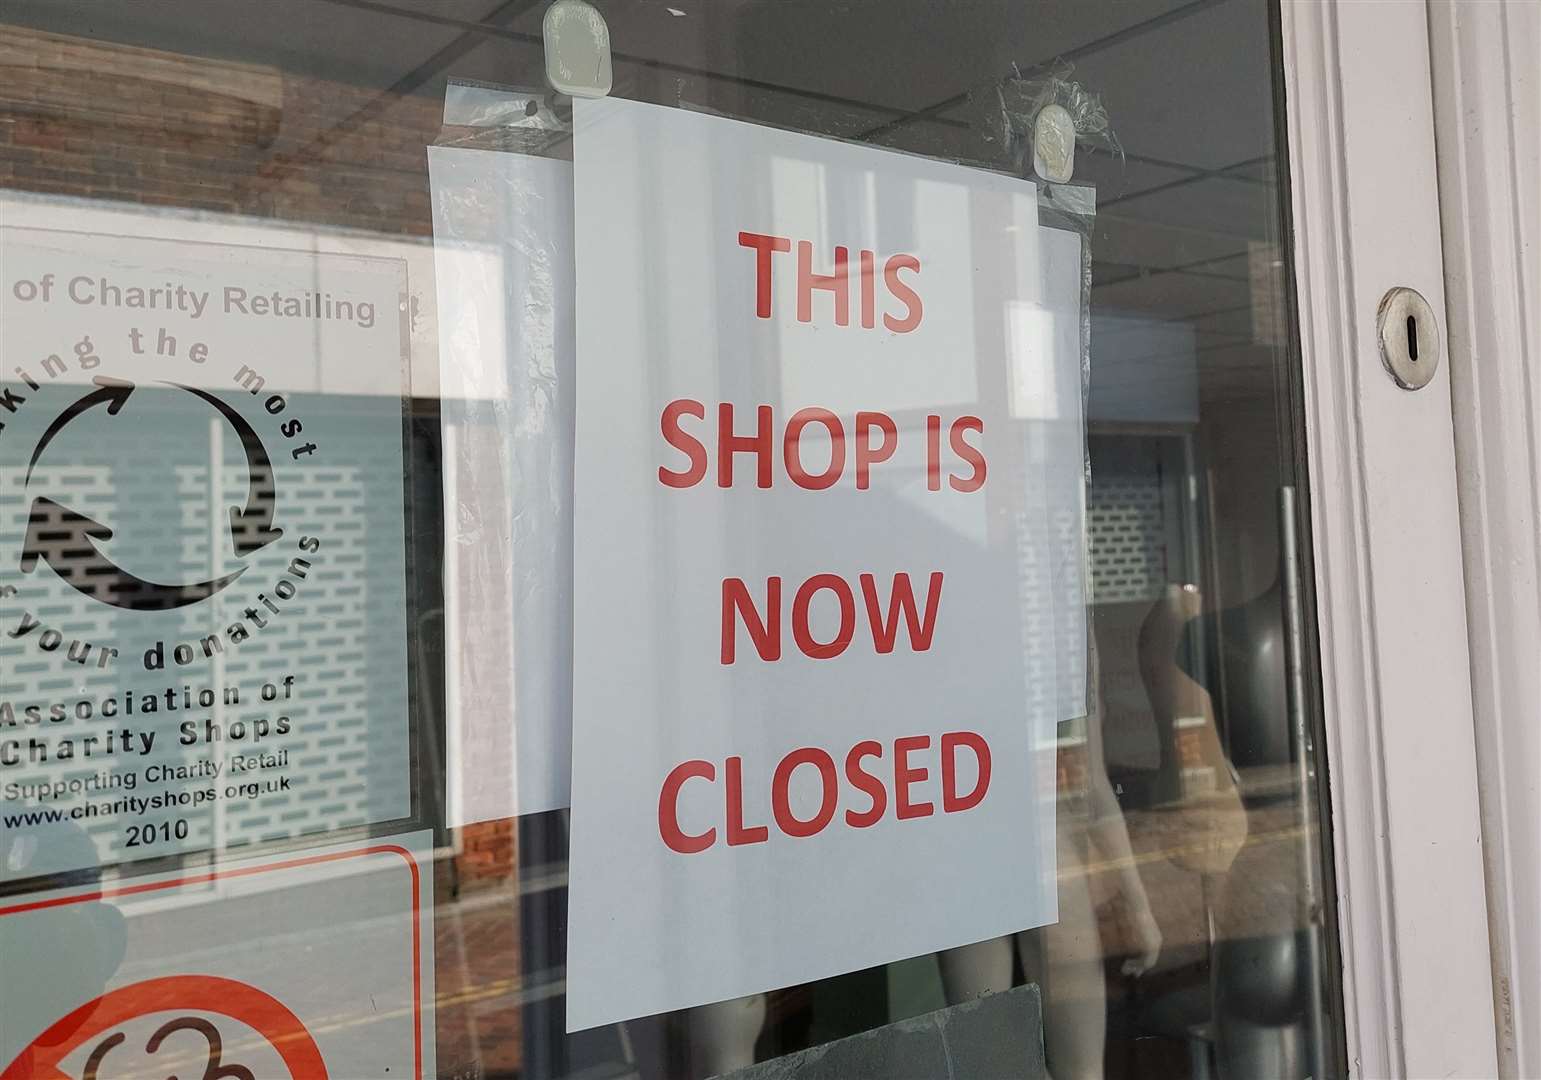 The shop is now empty